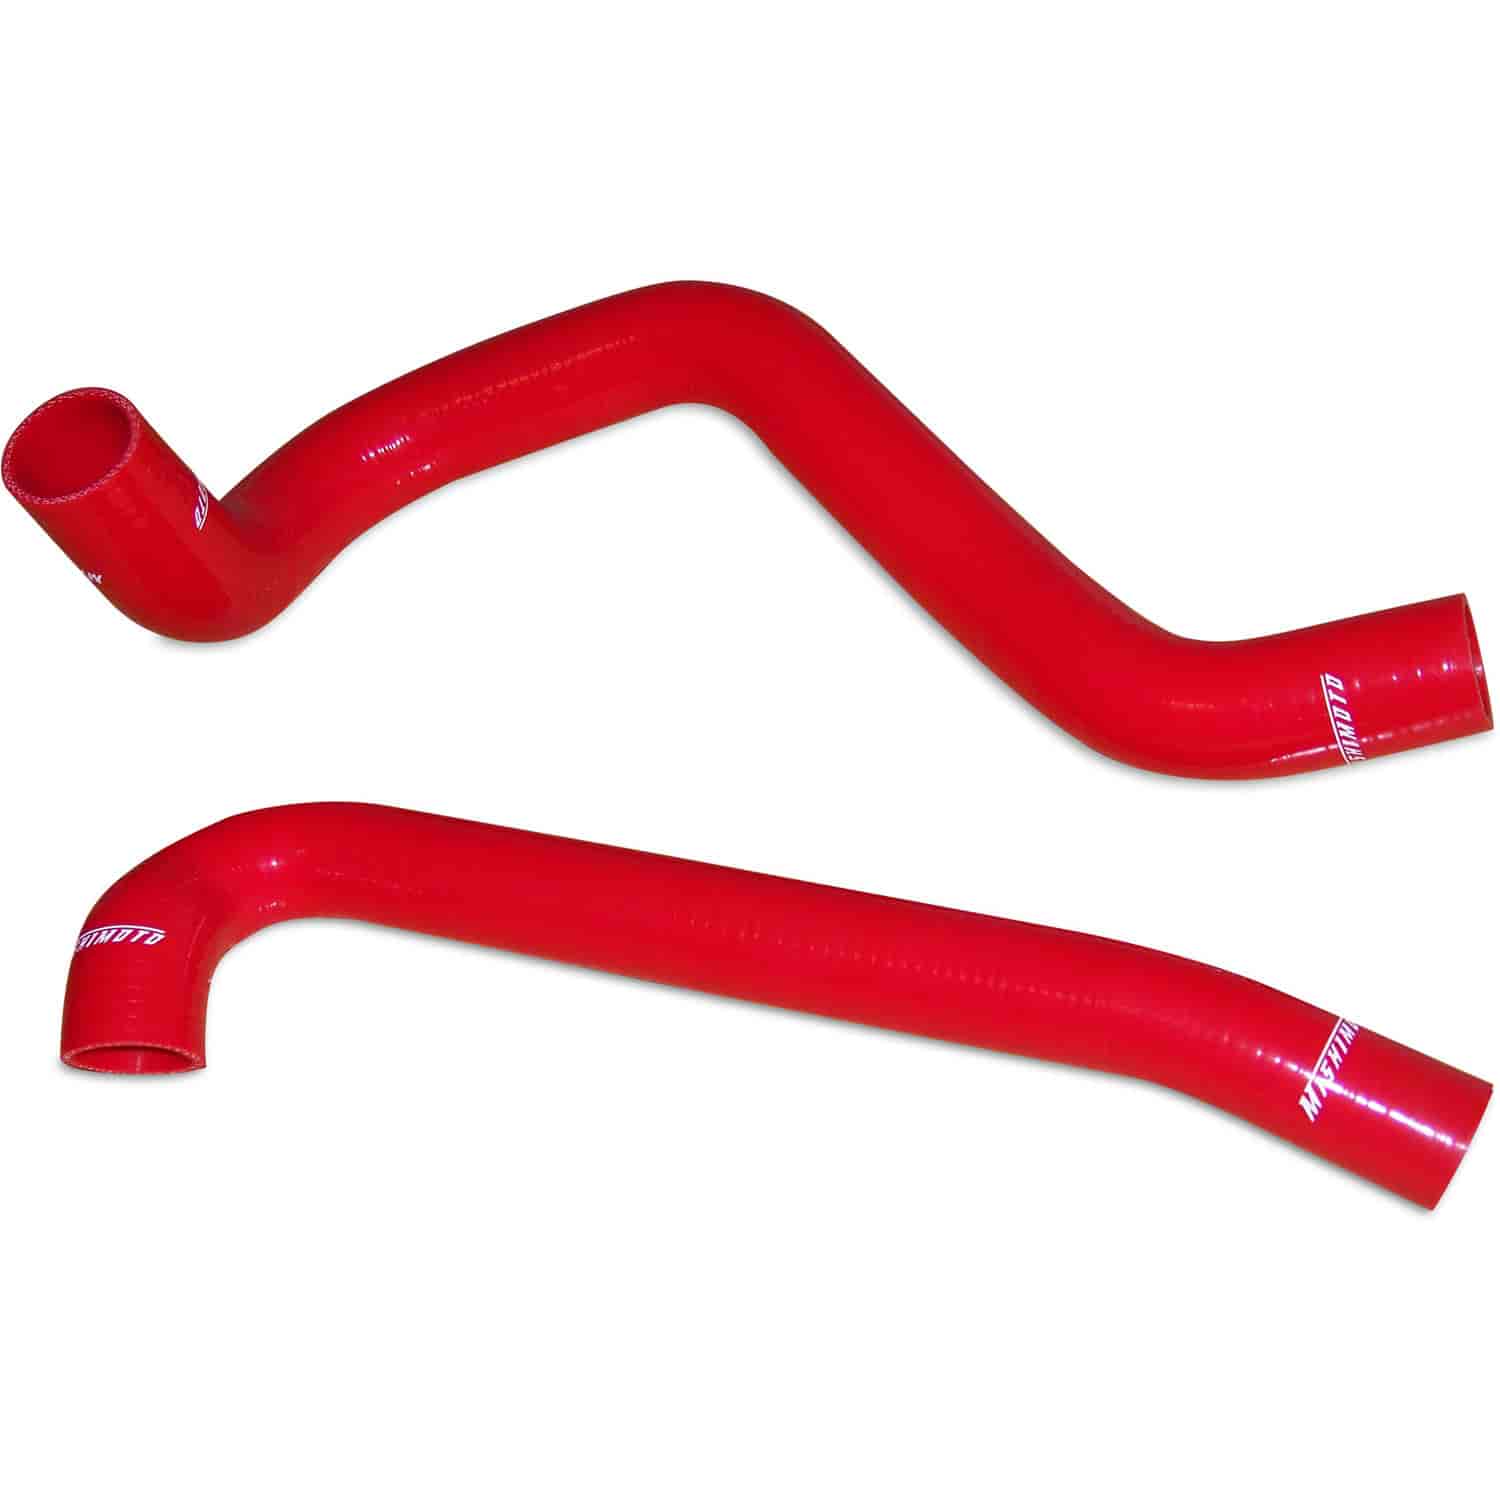 Jeep Wrangler 4 Cyl Silicone Hose Kit - MFG Part No. MMHOSE-WR4-97RD